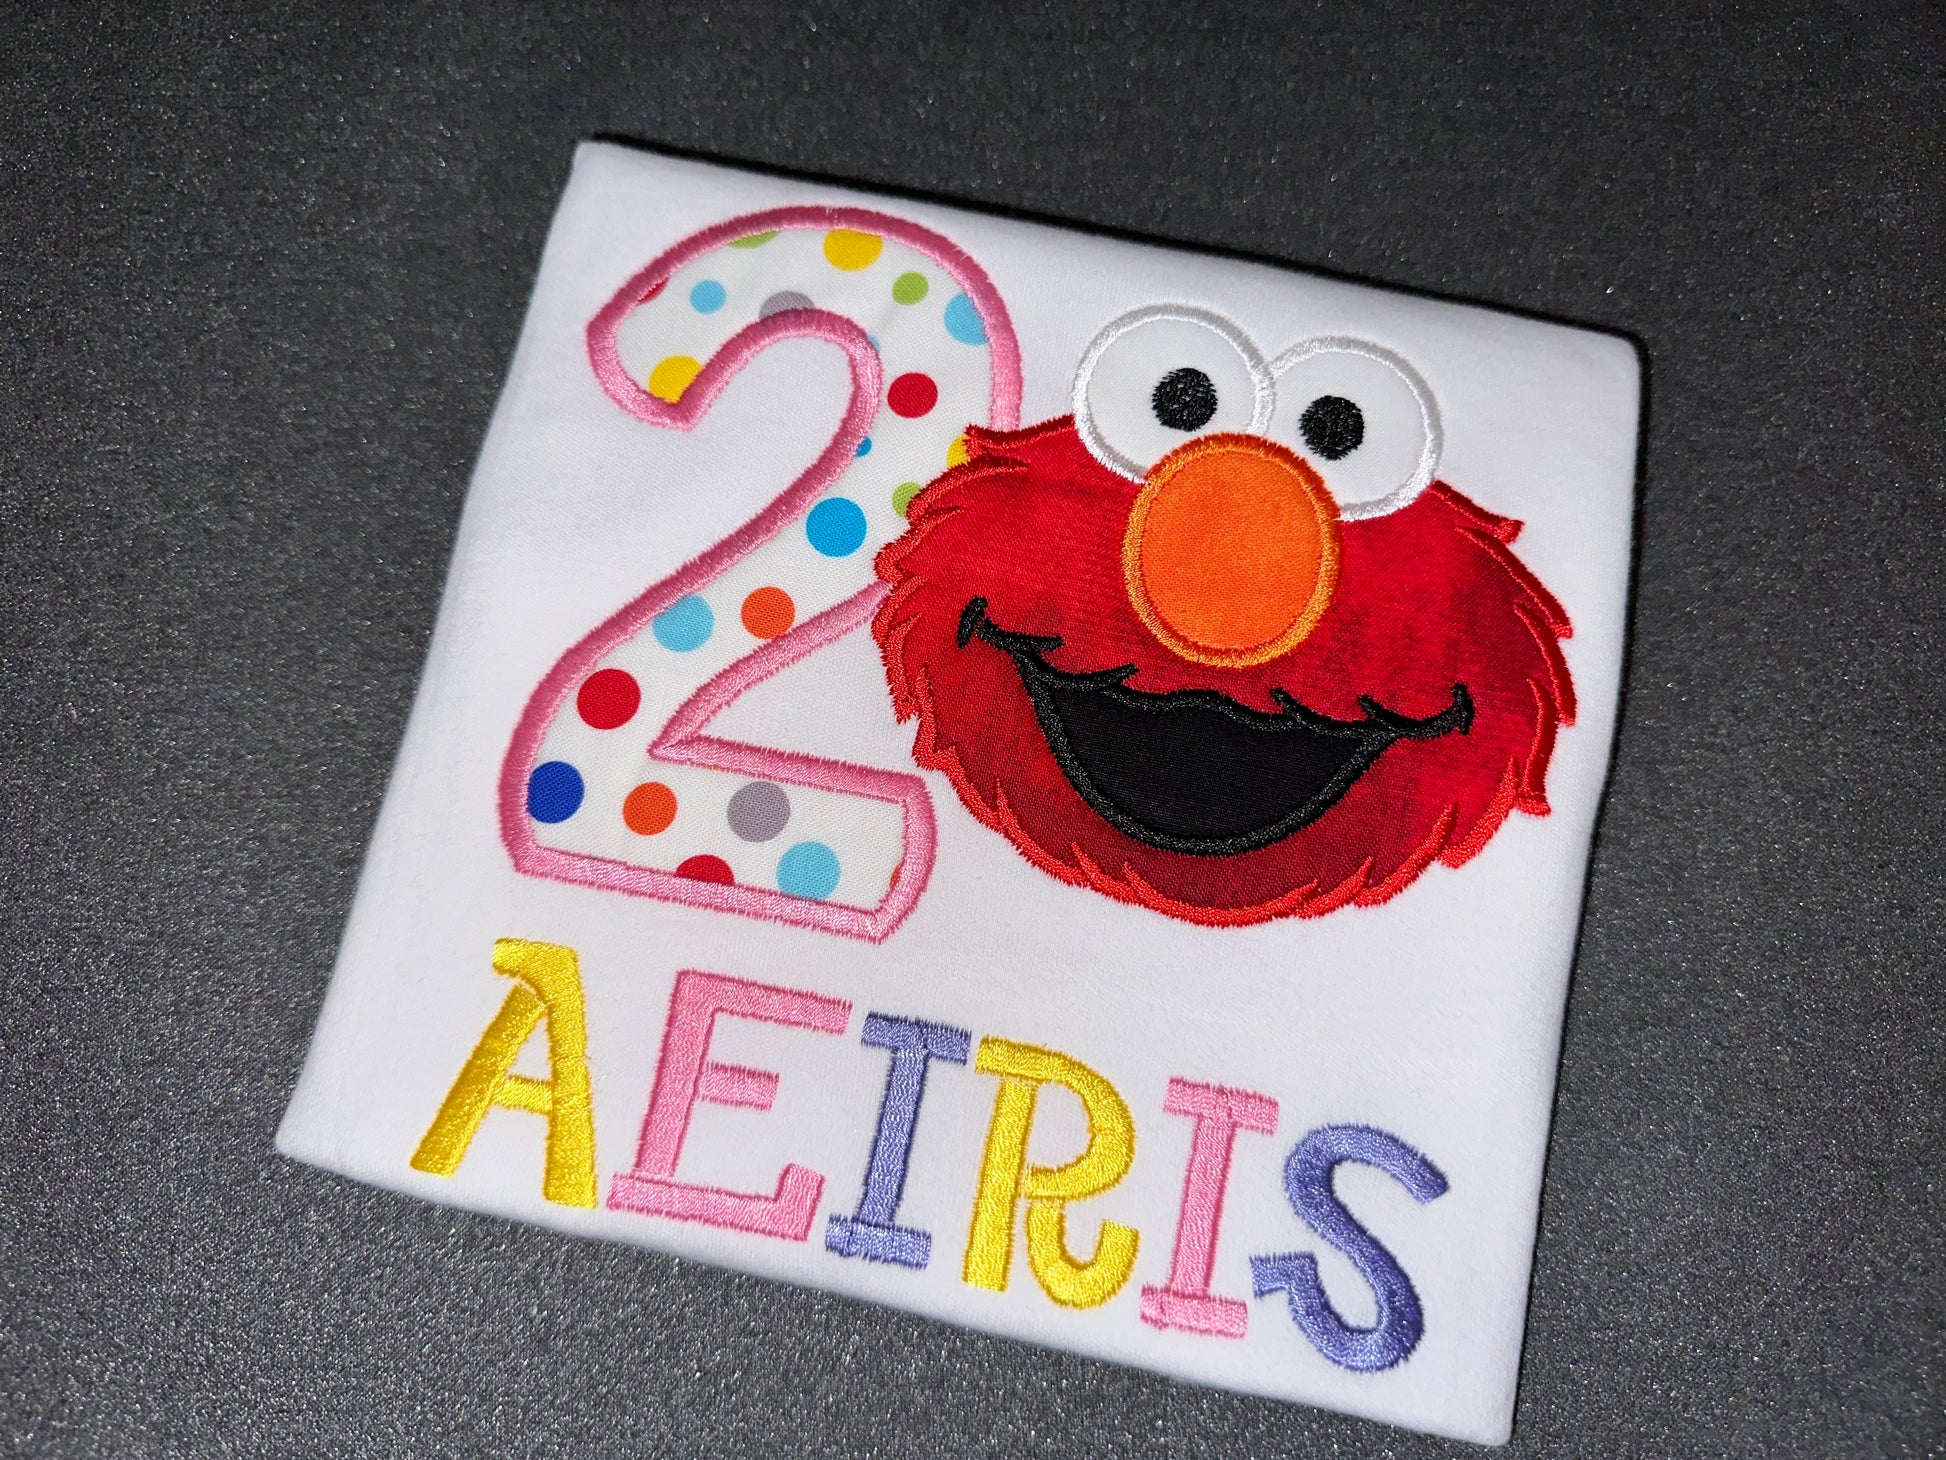 WHITE ELMO BIRTHDAY SHIRT FOR GIRLS. COMBED COTTON MATERIAL WITH EMBROIDERED AGE, NAME AND IMAGE